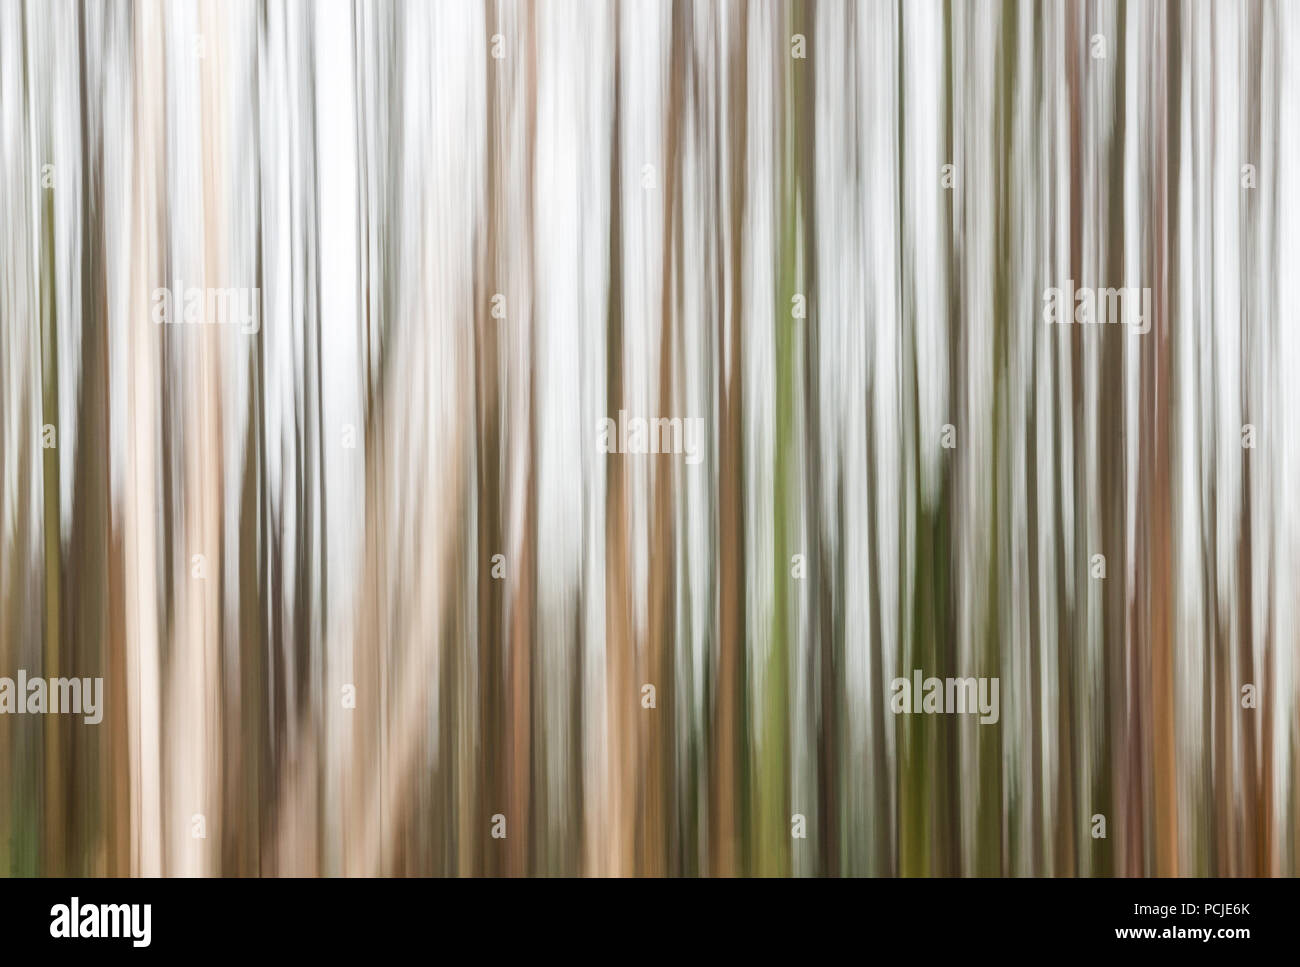 Intentional camera movement (ICM) of a row of trees creating a vertical blurred effect similar to a bar code Stock Photo